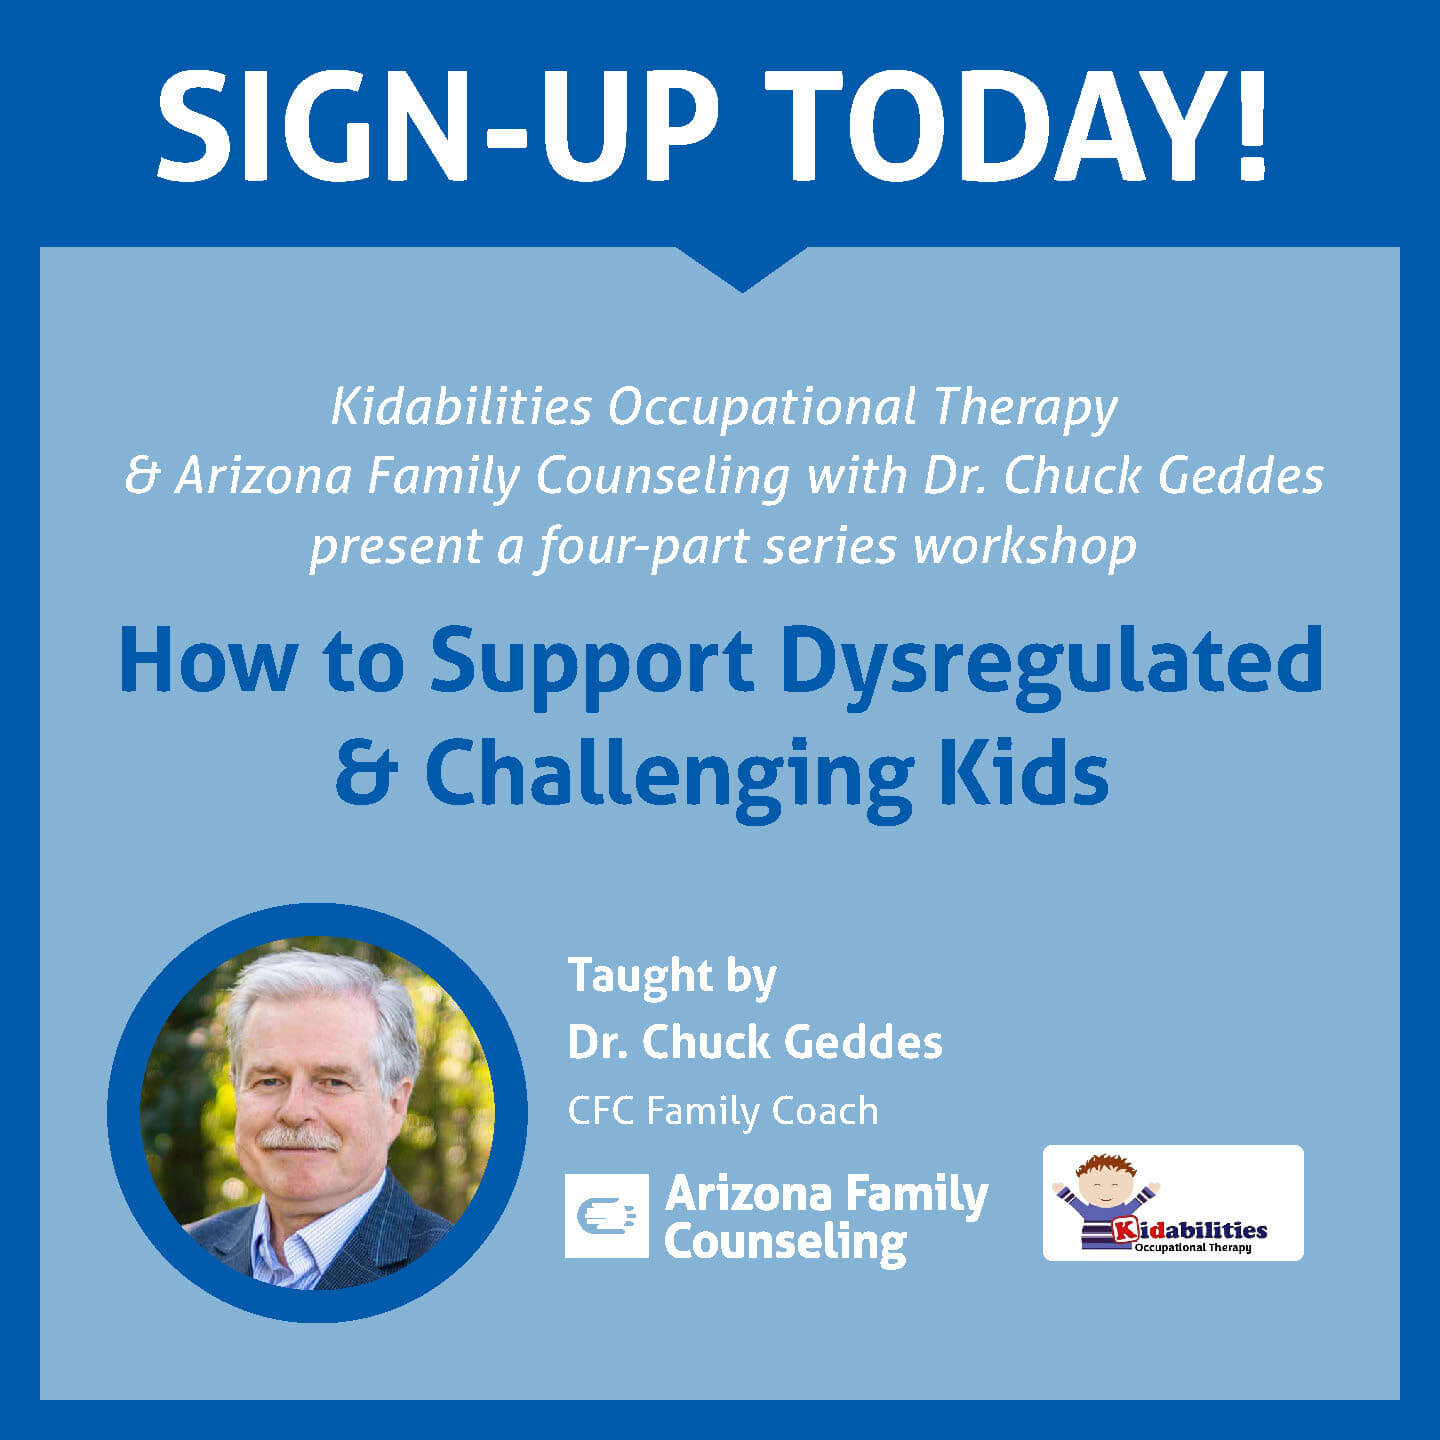 Arizona Family Counseling presents 4-part Series on How to Support Dysregulated & Challenging Kids, sign up today!